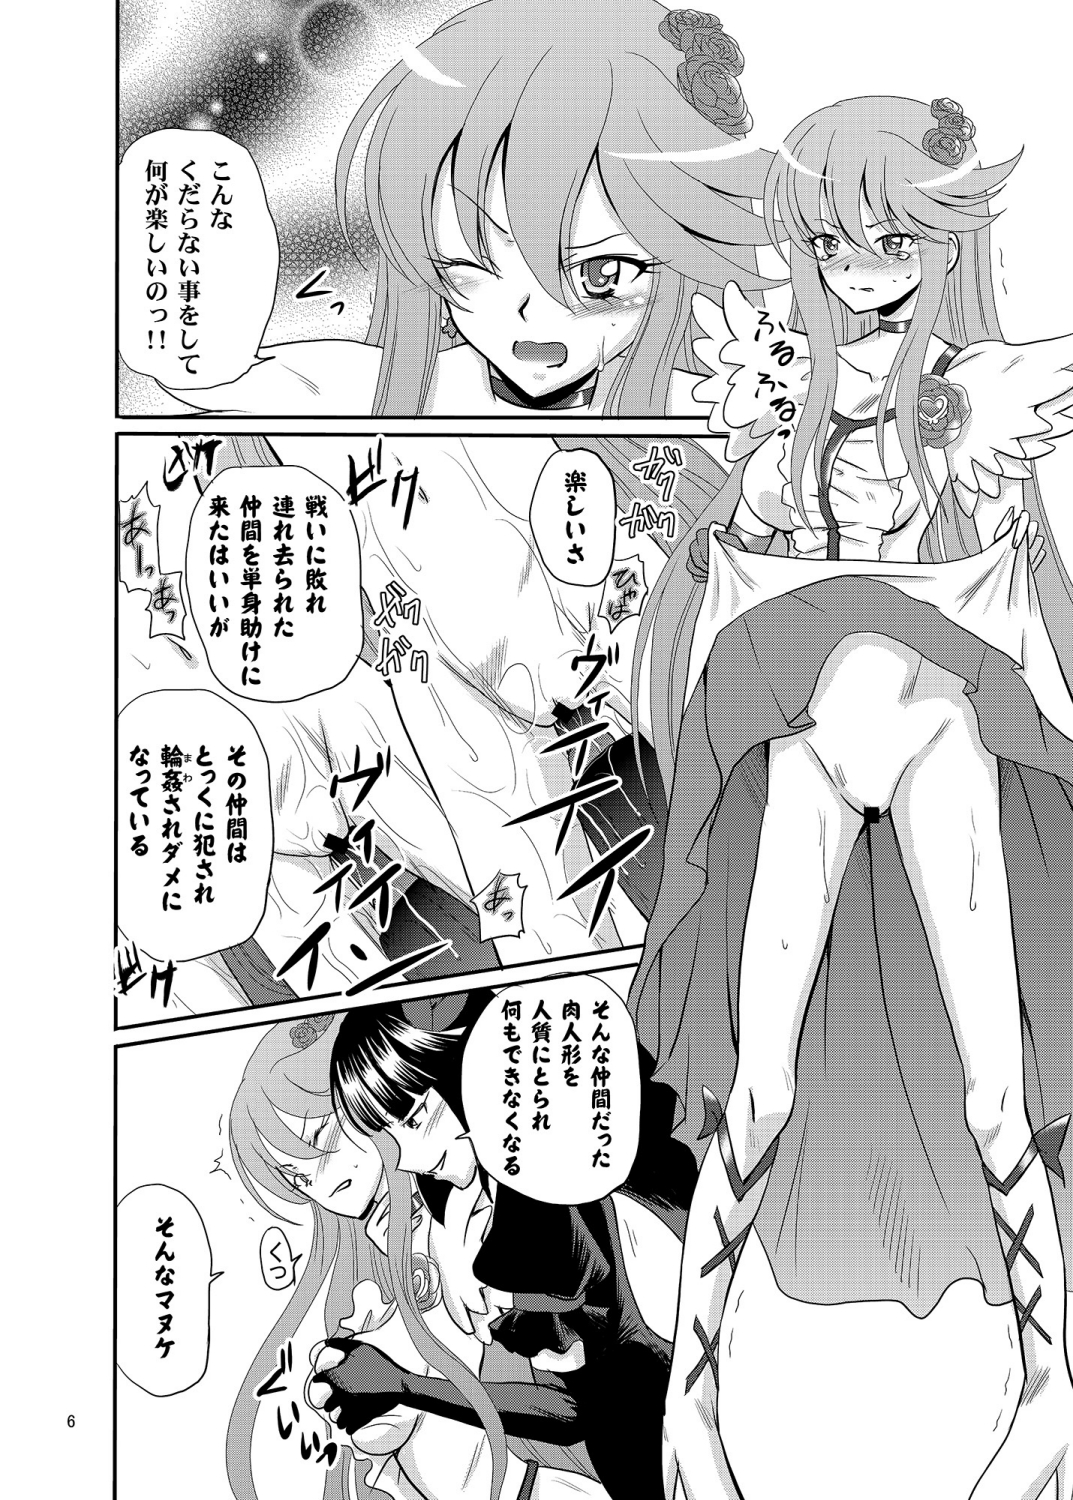 [Cartagra (Kugami Angning)] ARCANUMS 19 (HeartCatch PreCure!) [Digital] page 6 full